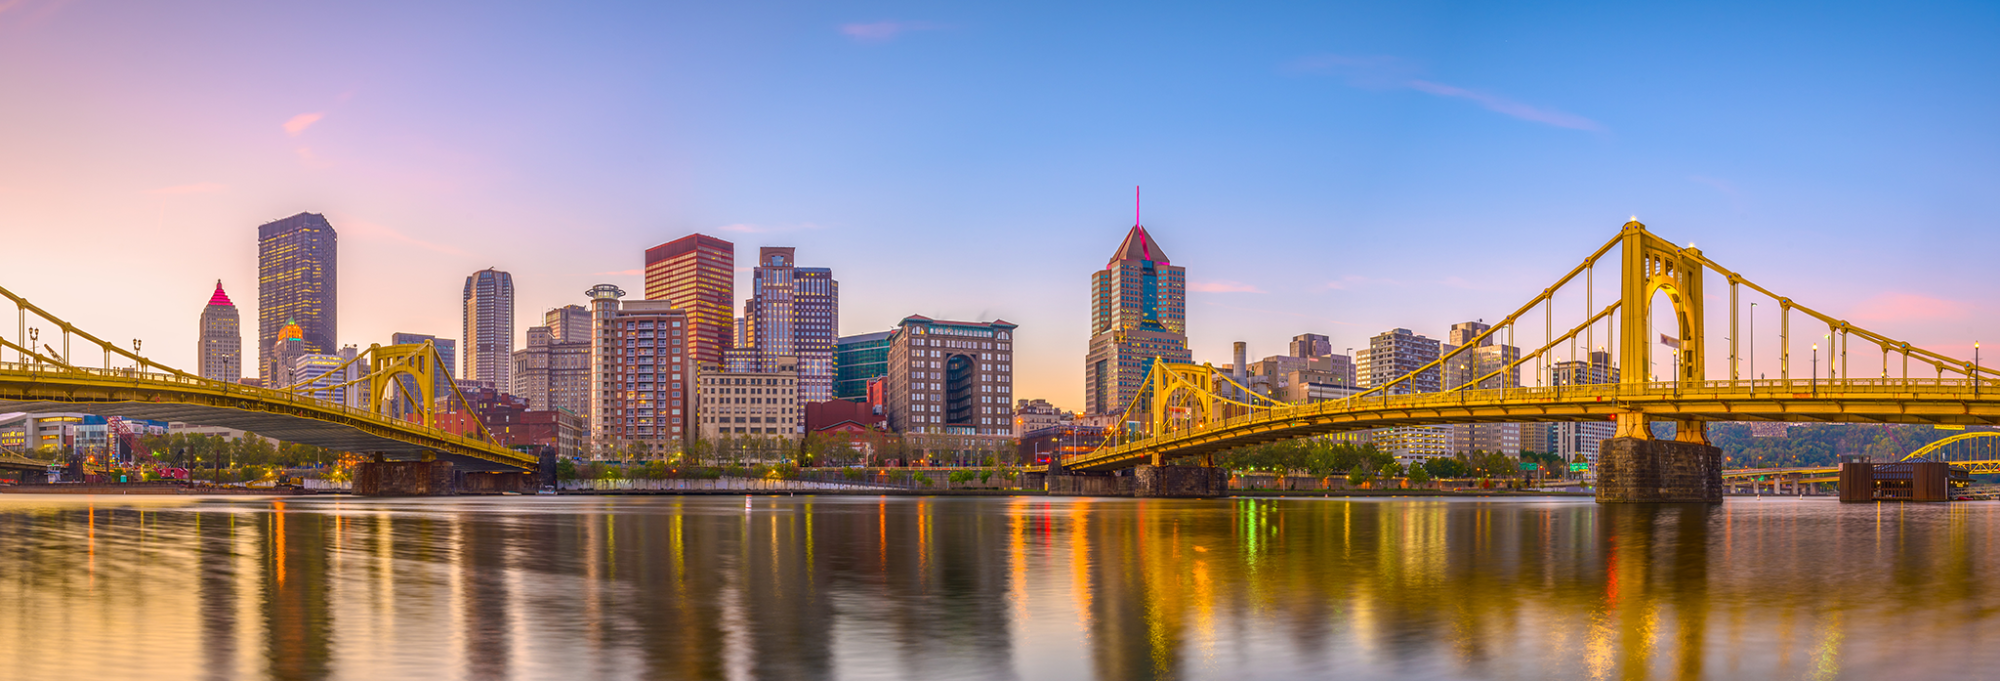 Learn more about business development in Pittsburgh, PA